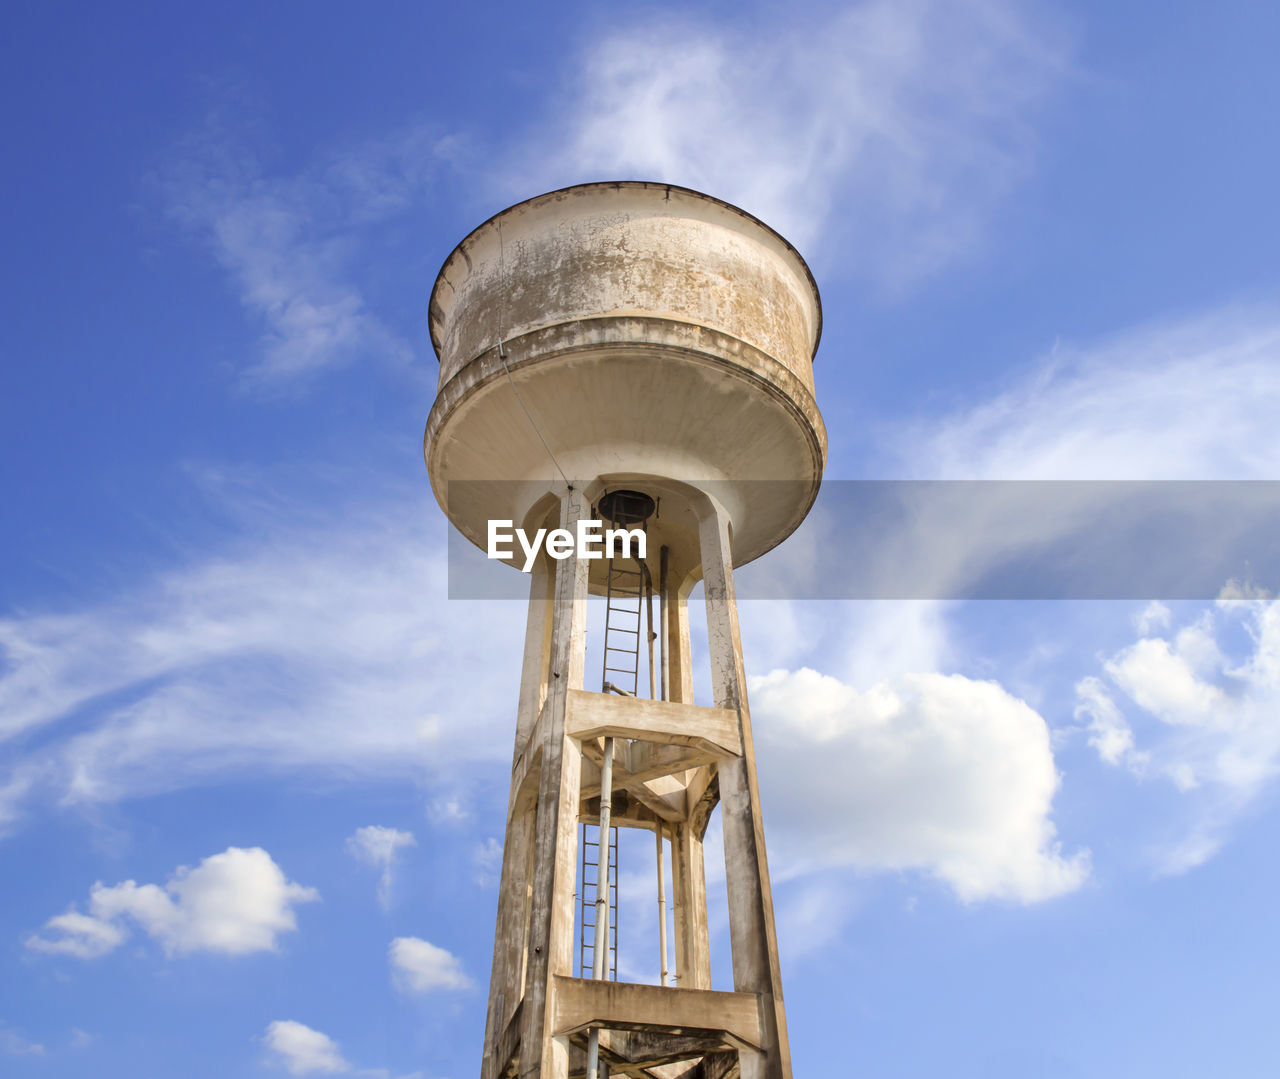 Water tower painted white under blue sky